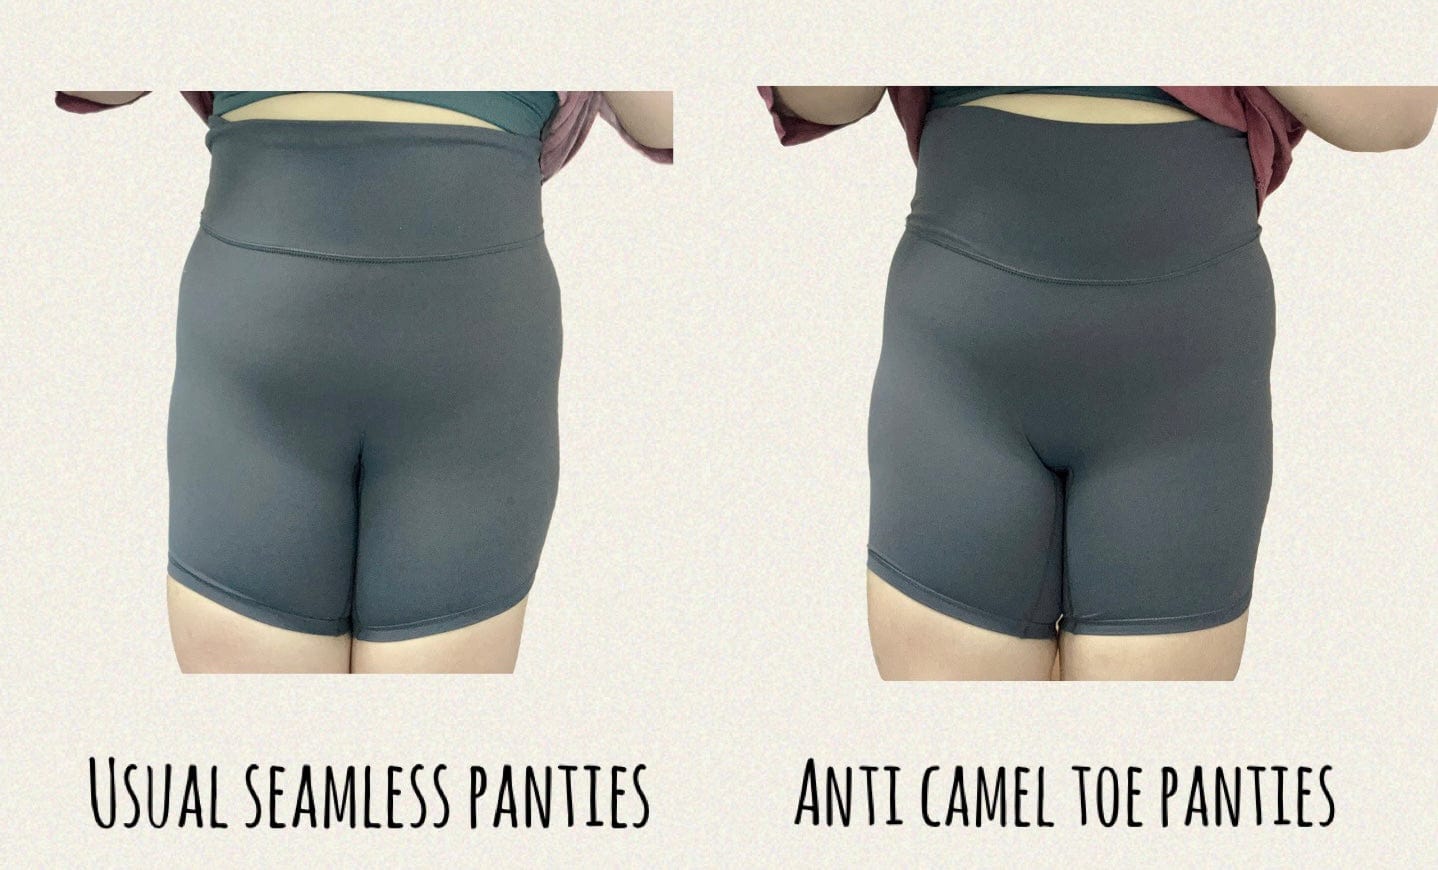 Everyday anti camel toe panties (do not use hot water to wash) - stick